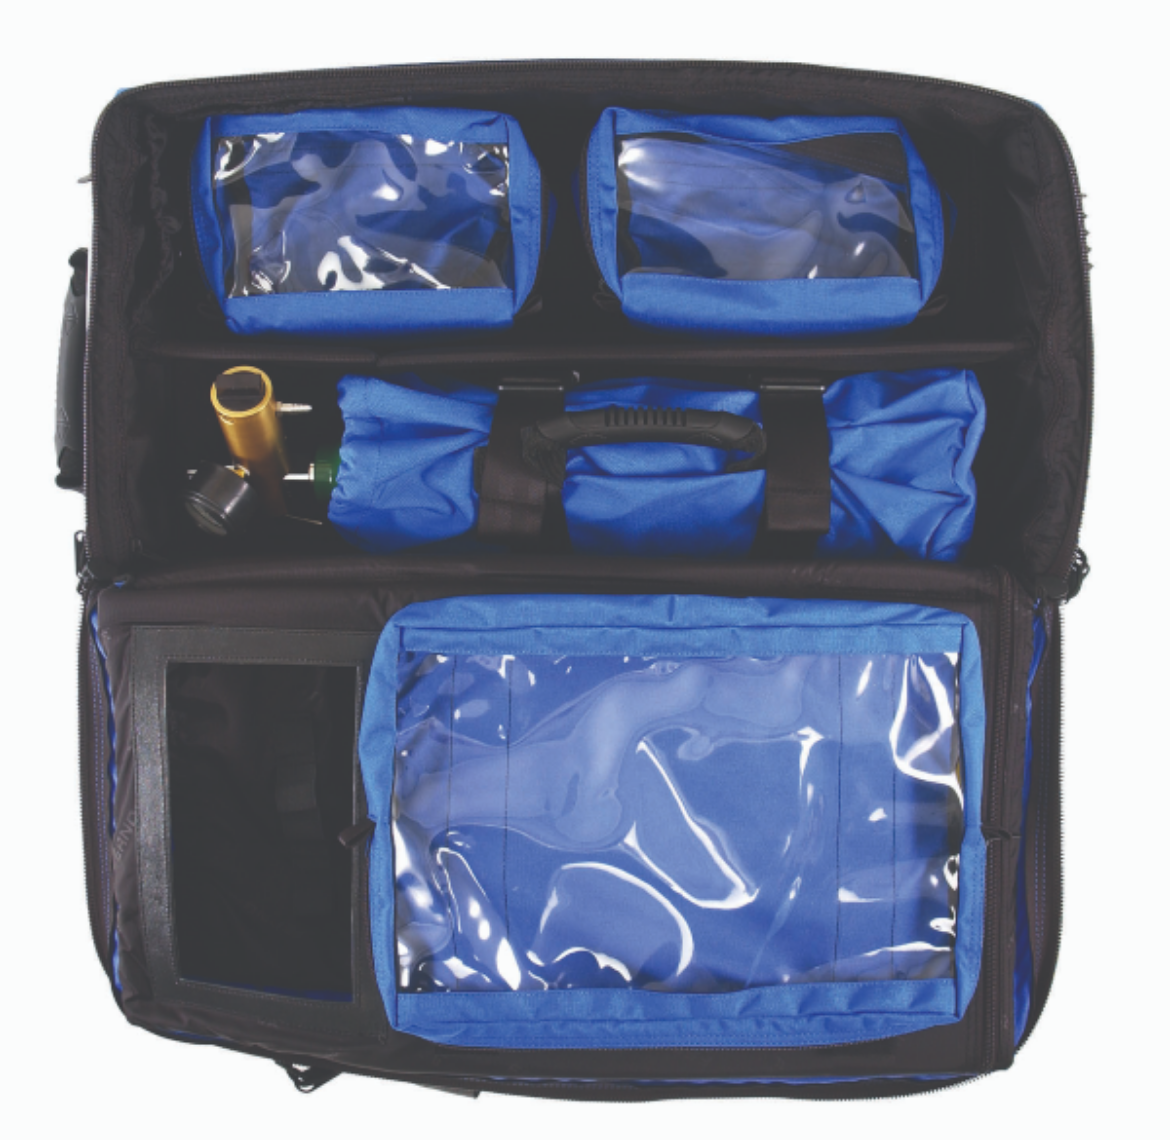 Picture of FERNO 5110 PROFESSIONAL TRAUMA/AIRWAY KIT II BLUE